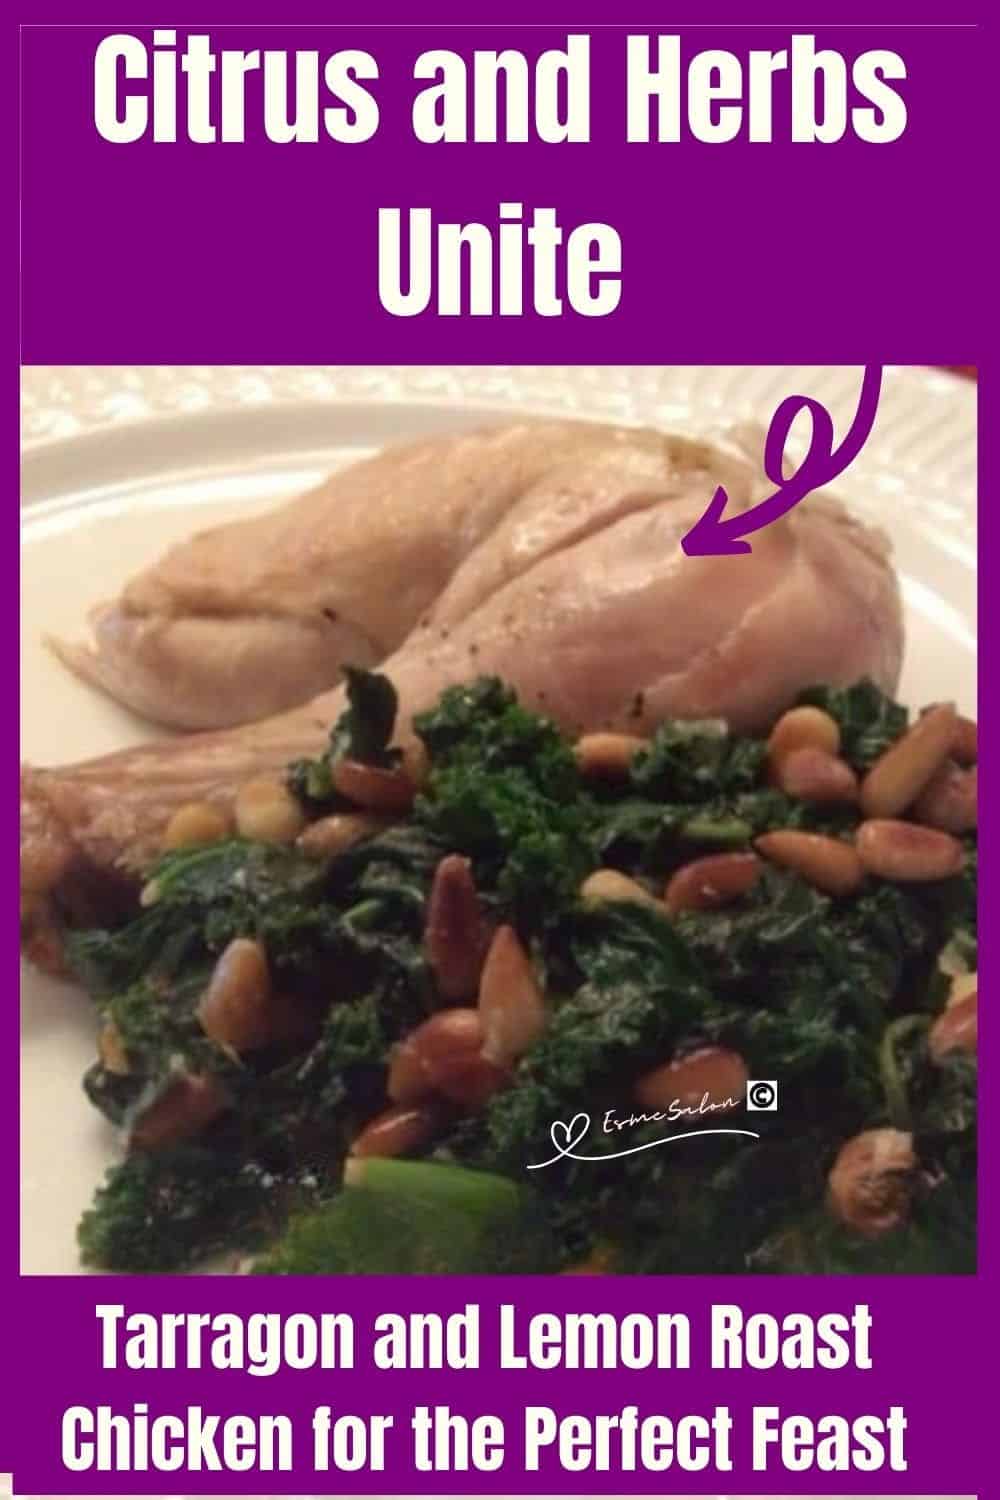 an image of a chicken with lemon and Tarragon baked and served with spinach and kale and pine nuts